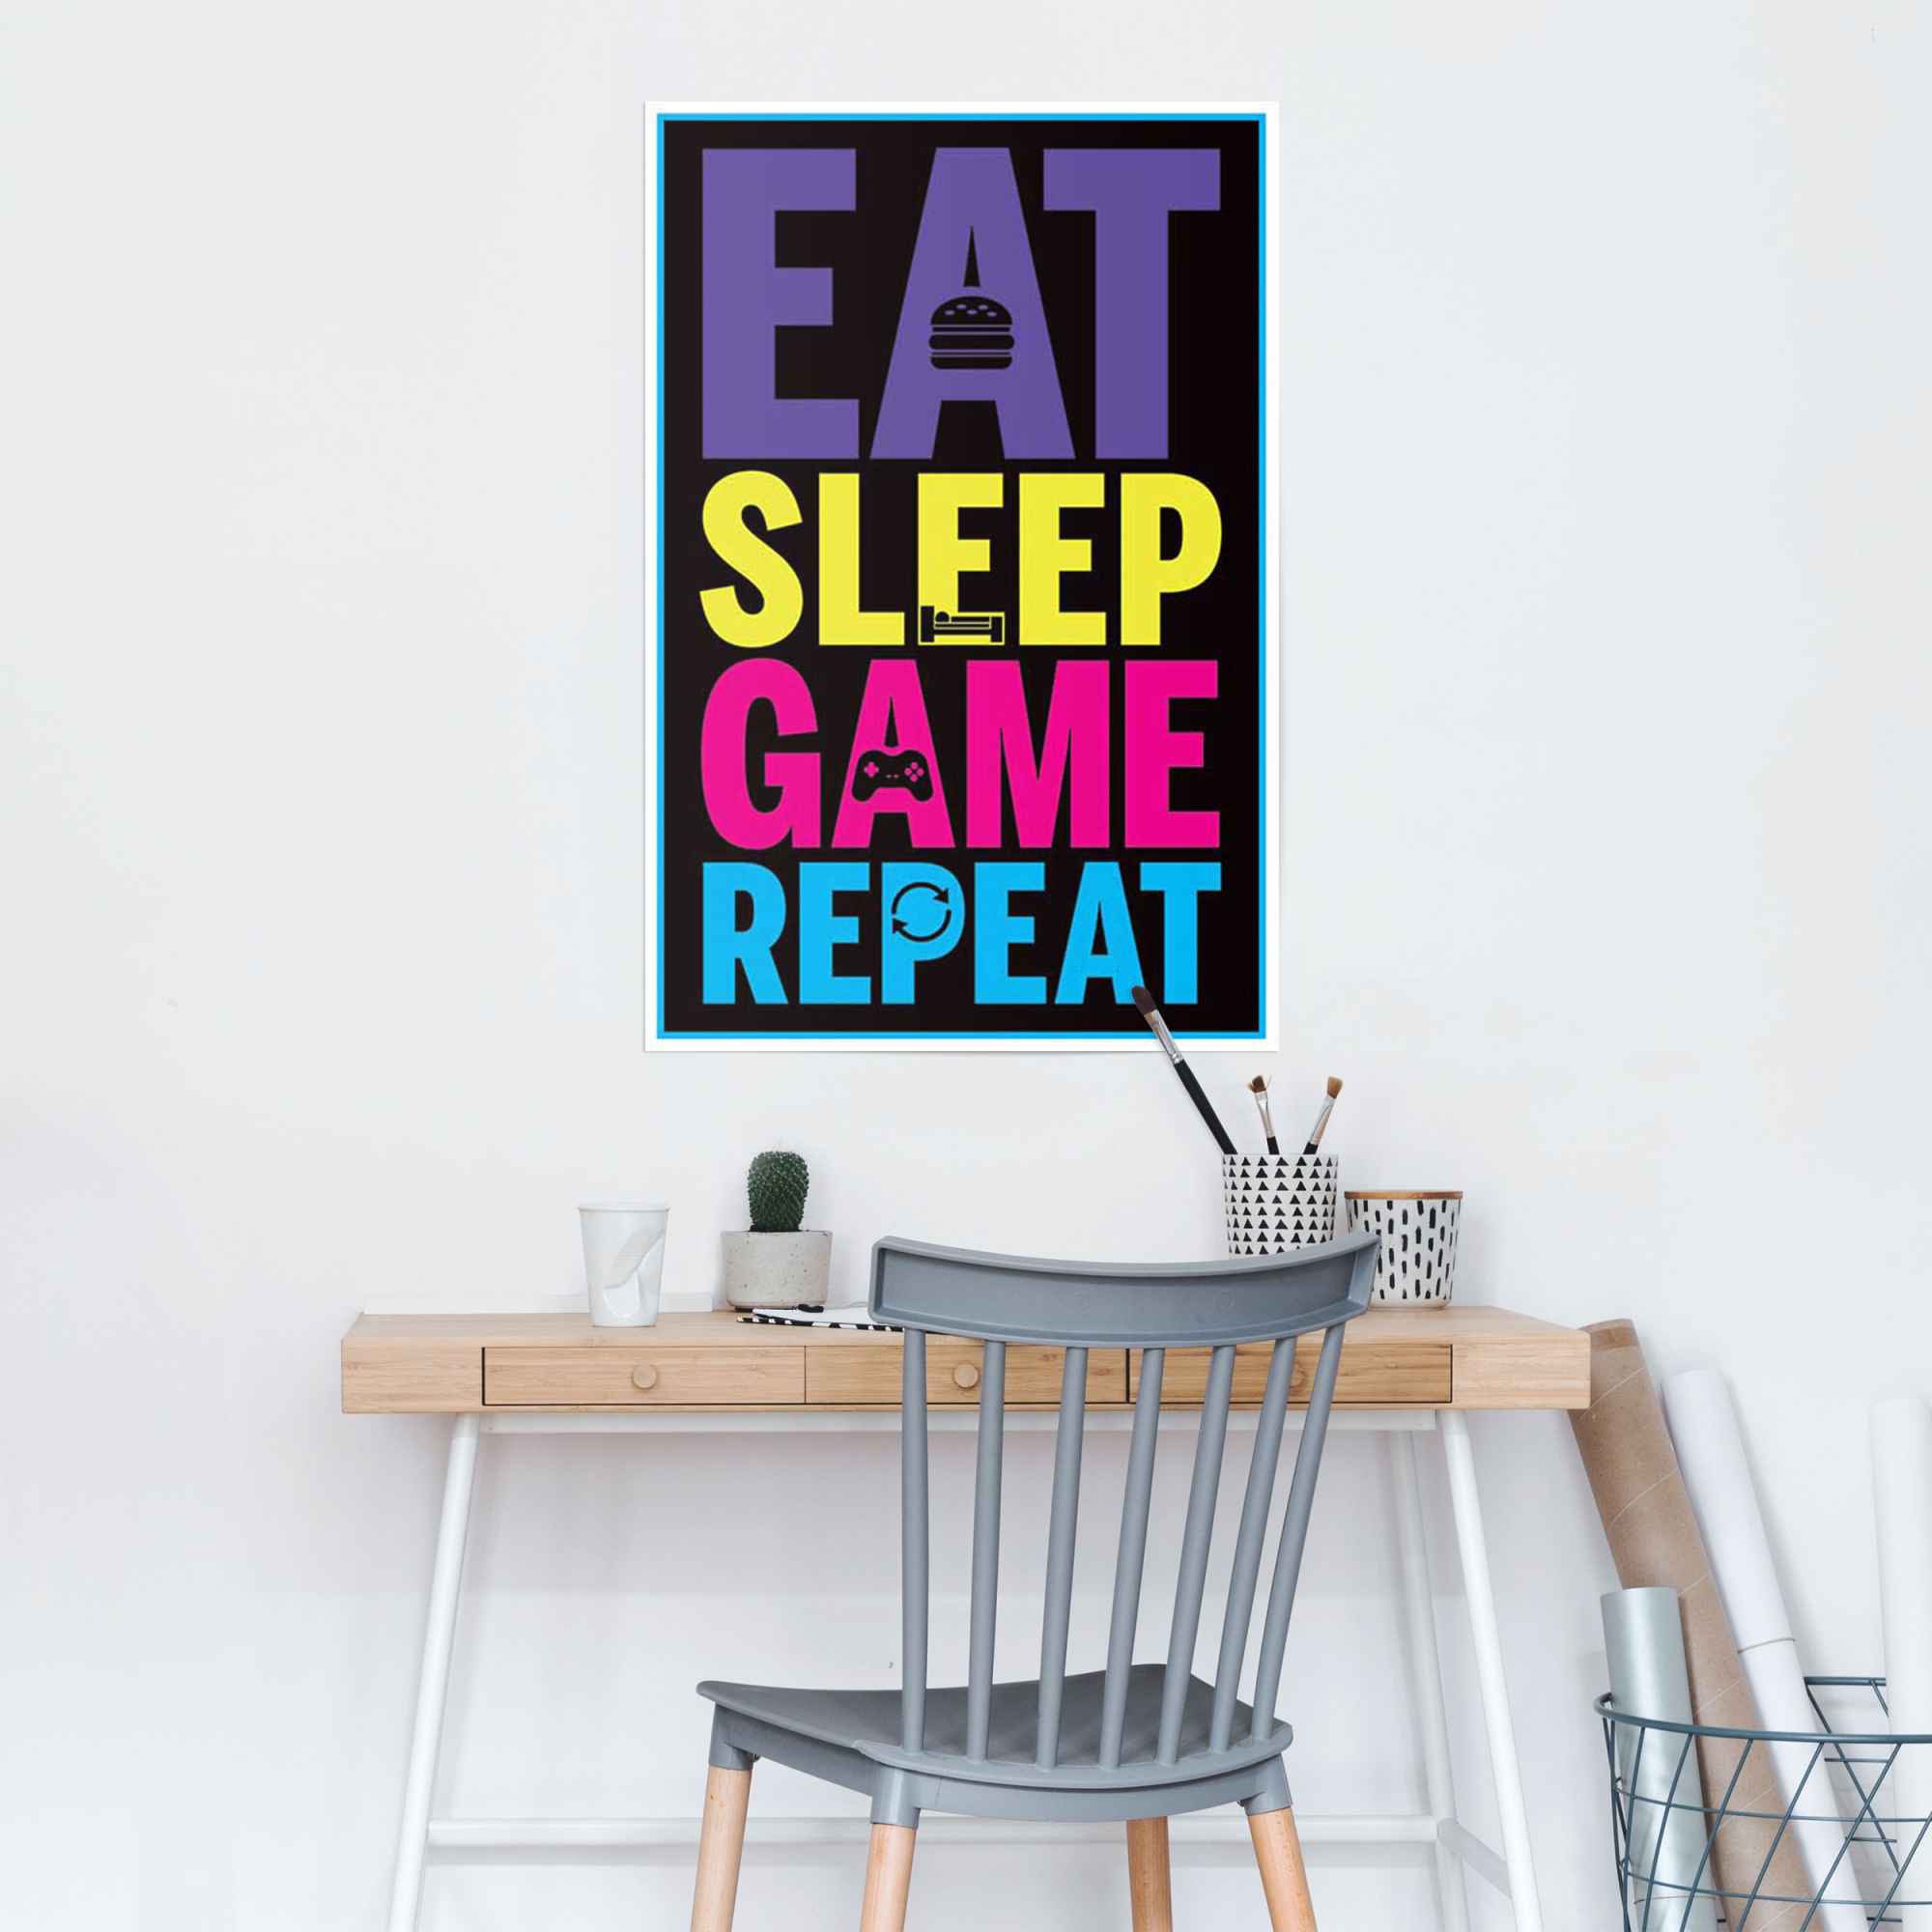 repeat«, game (1 Poster bequem Reinders! St.) sleep kaufen »Eat